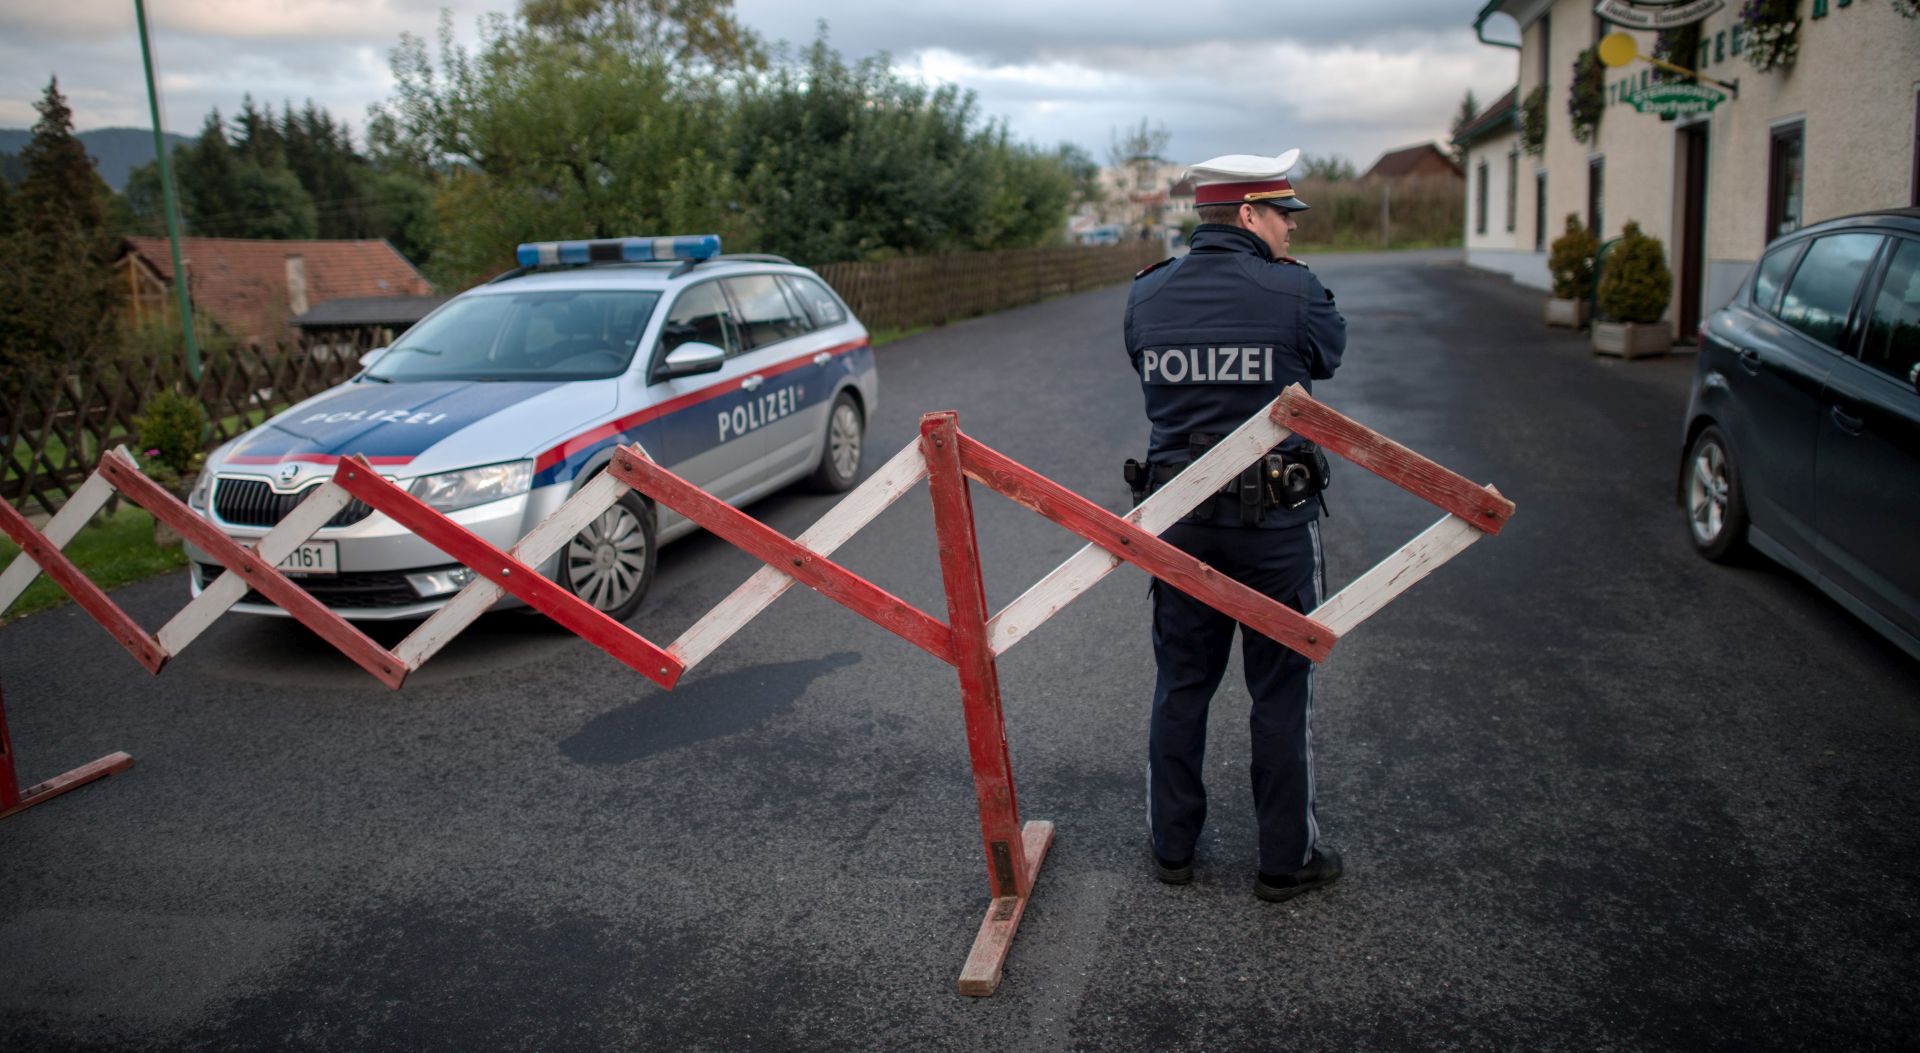 epa05575078 An Austrian police officer blocks a road next to a crime scene in Trofaiach, Austria, 07 October 2016. According to local media a 23-year-old police officer was arrested earlier this day after he confessed the murders of his 25-year-old wife and  one-year-old child. The man reported that his wife and child is missing on 03 October 2016.  EPA/CHRISTIAN BRUNA